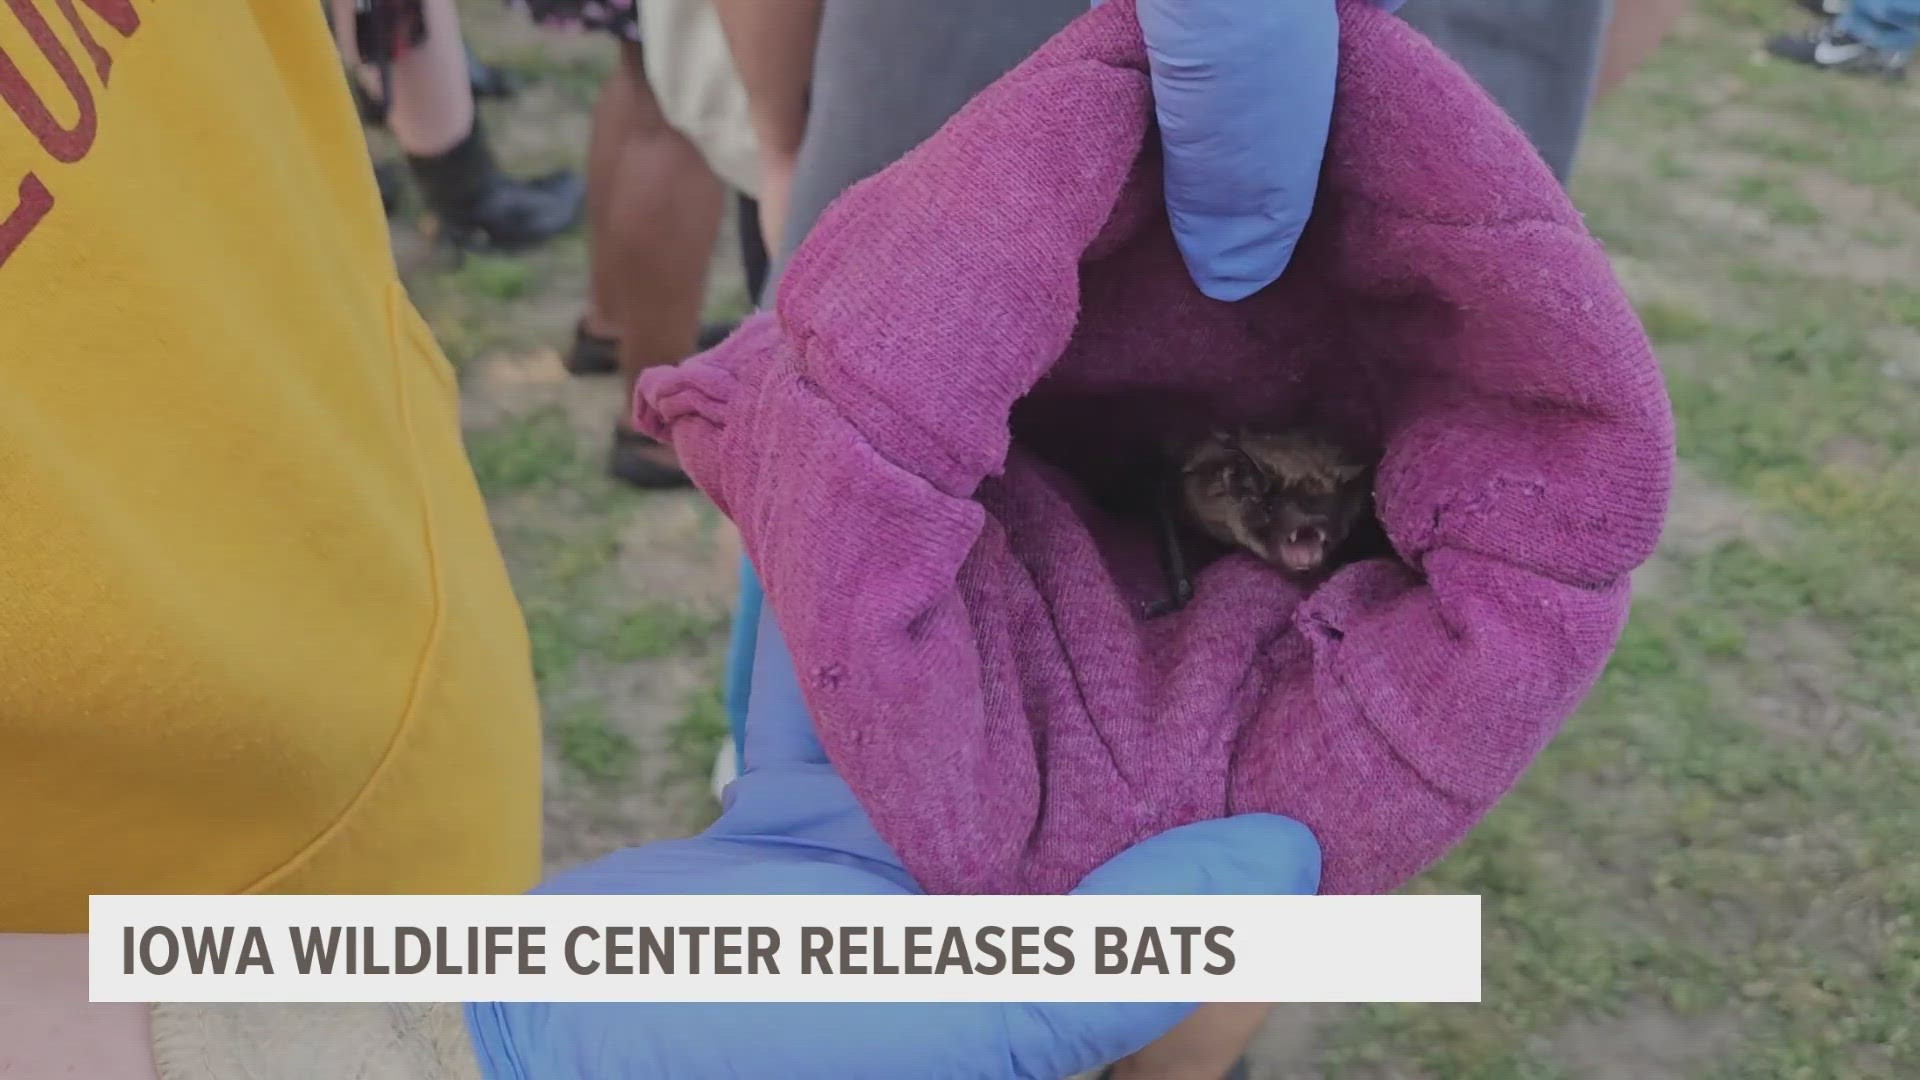 The community was able to get up close and personal with the brown bats.